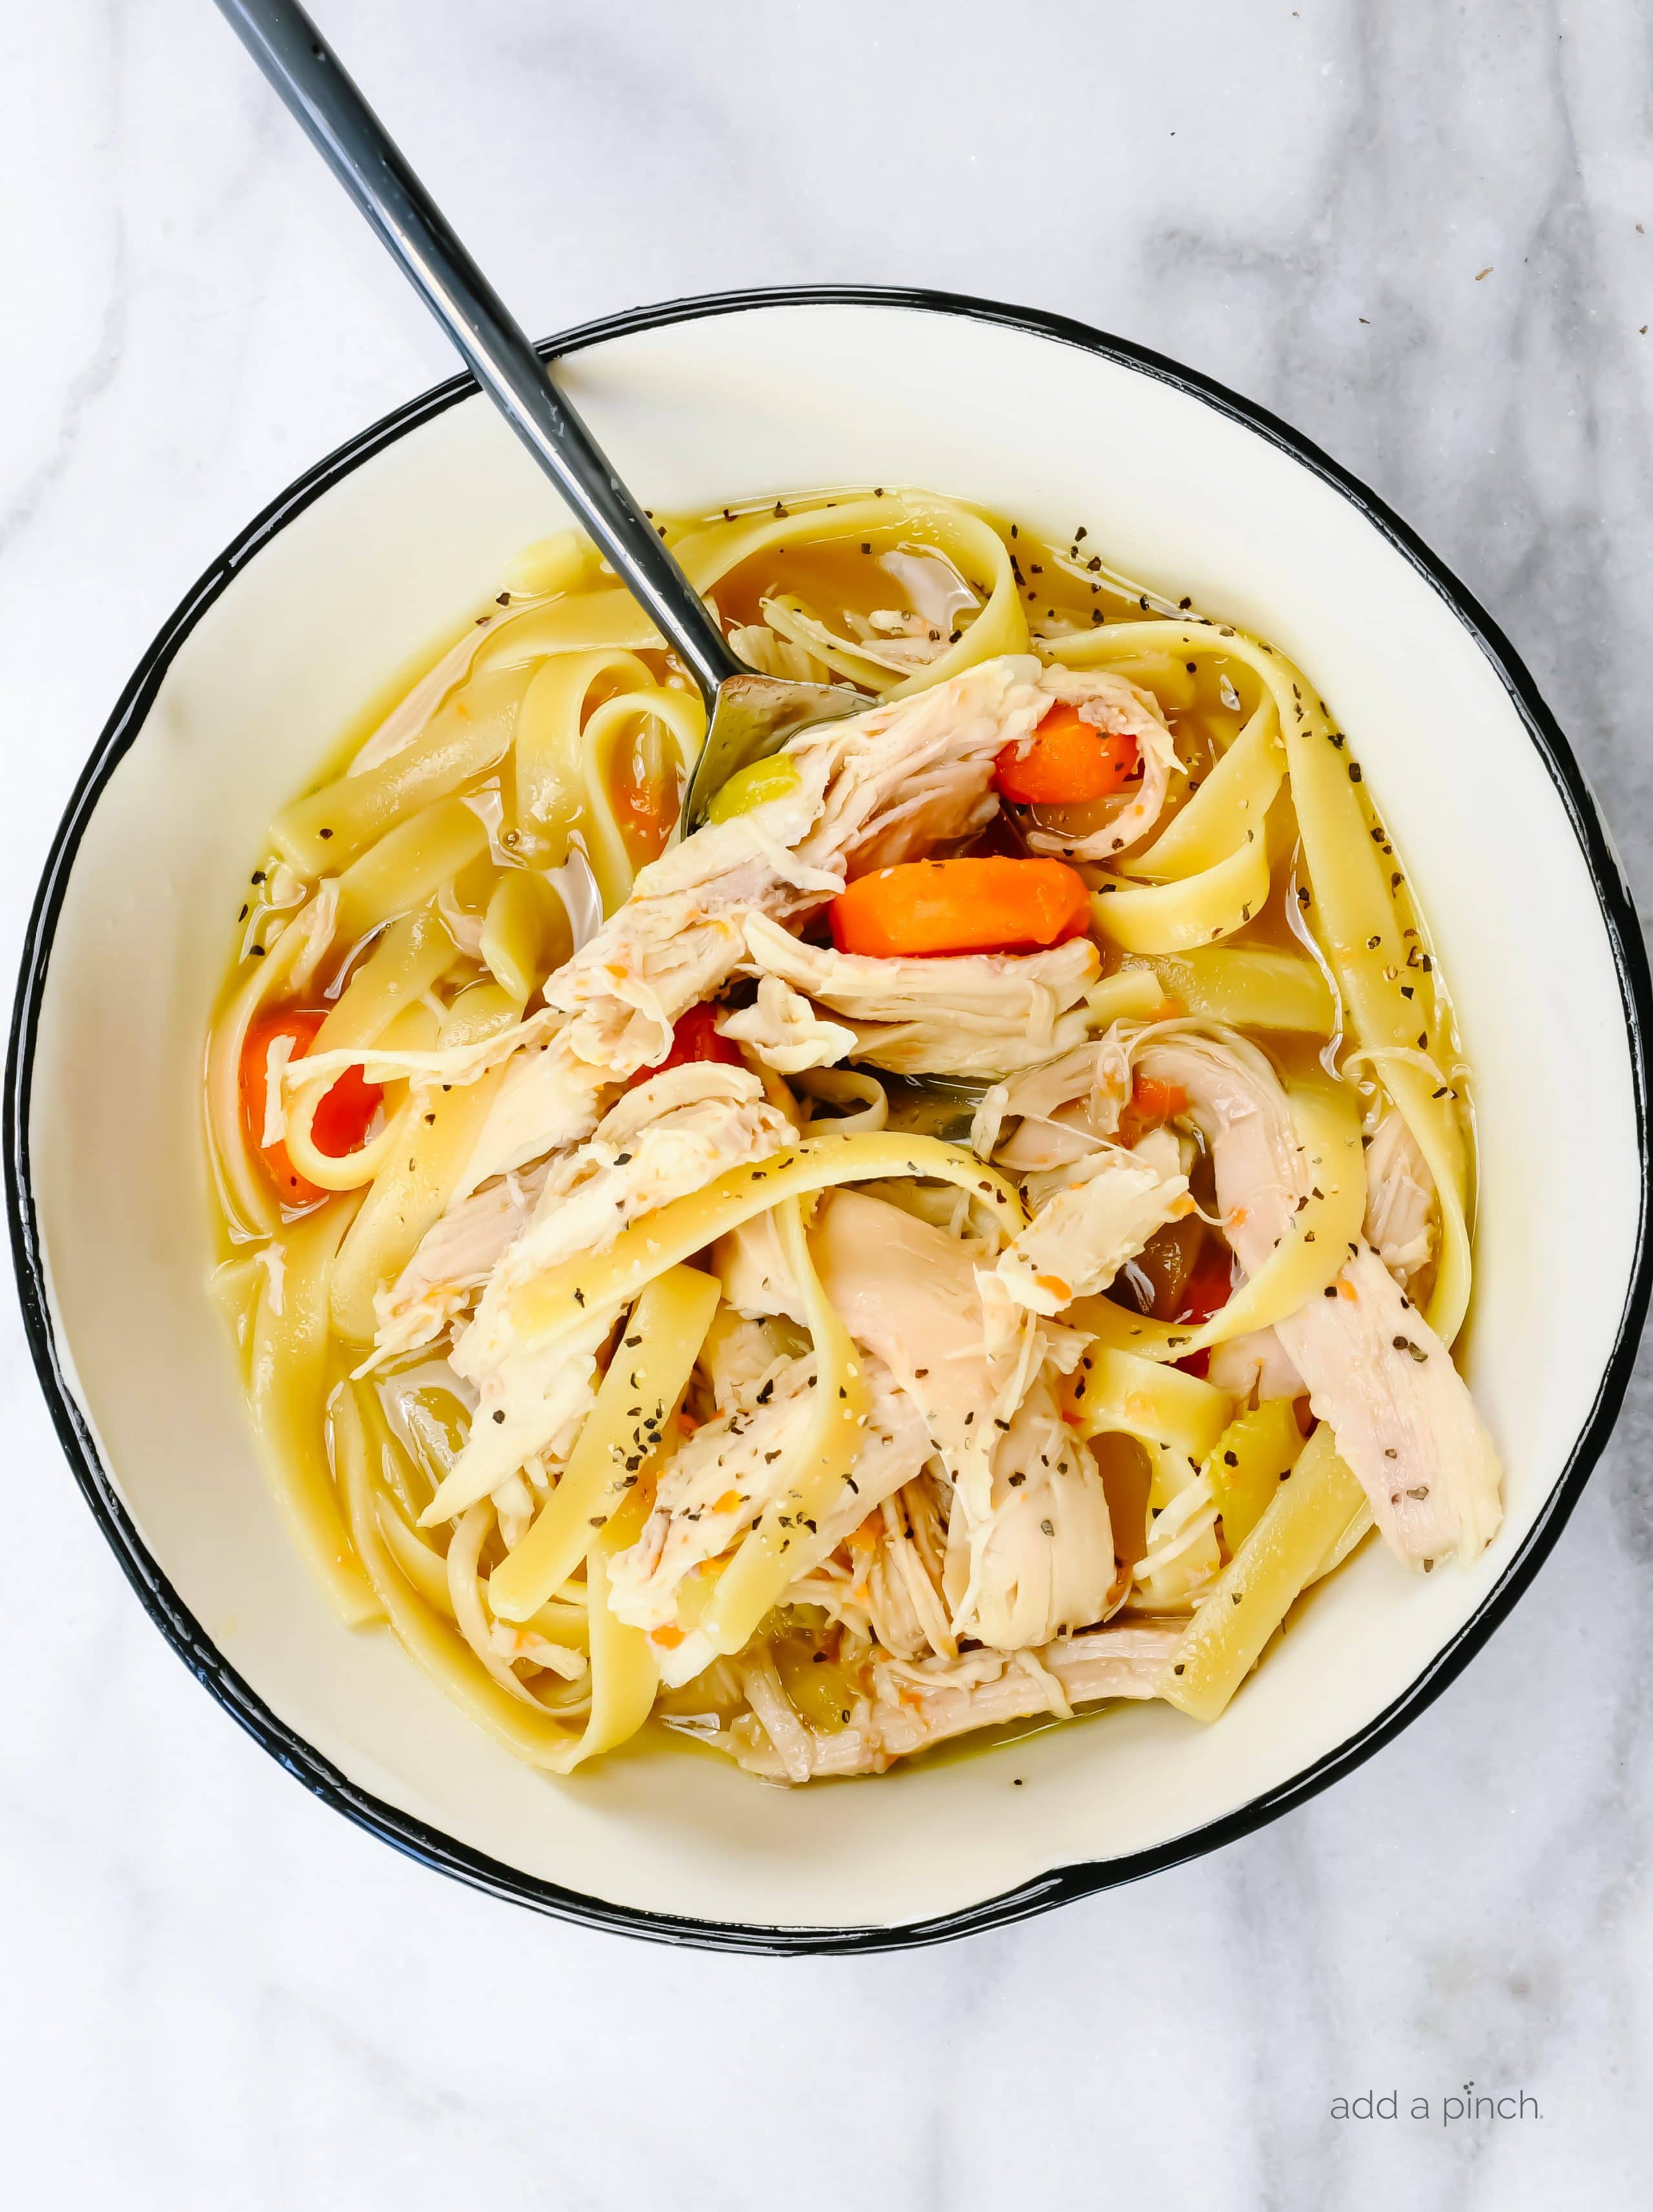 Instant Pot Chicken Noodle Soup Recipe - Add a Pinch